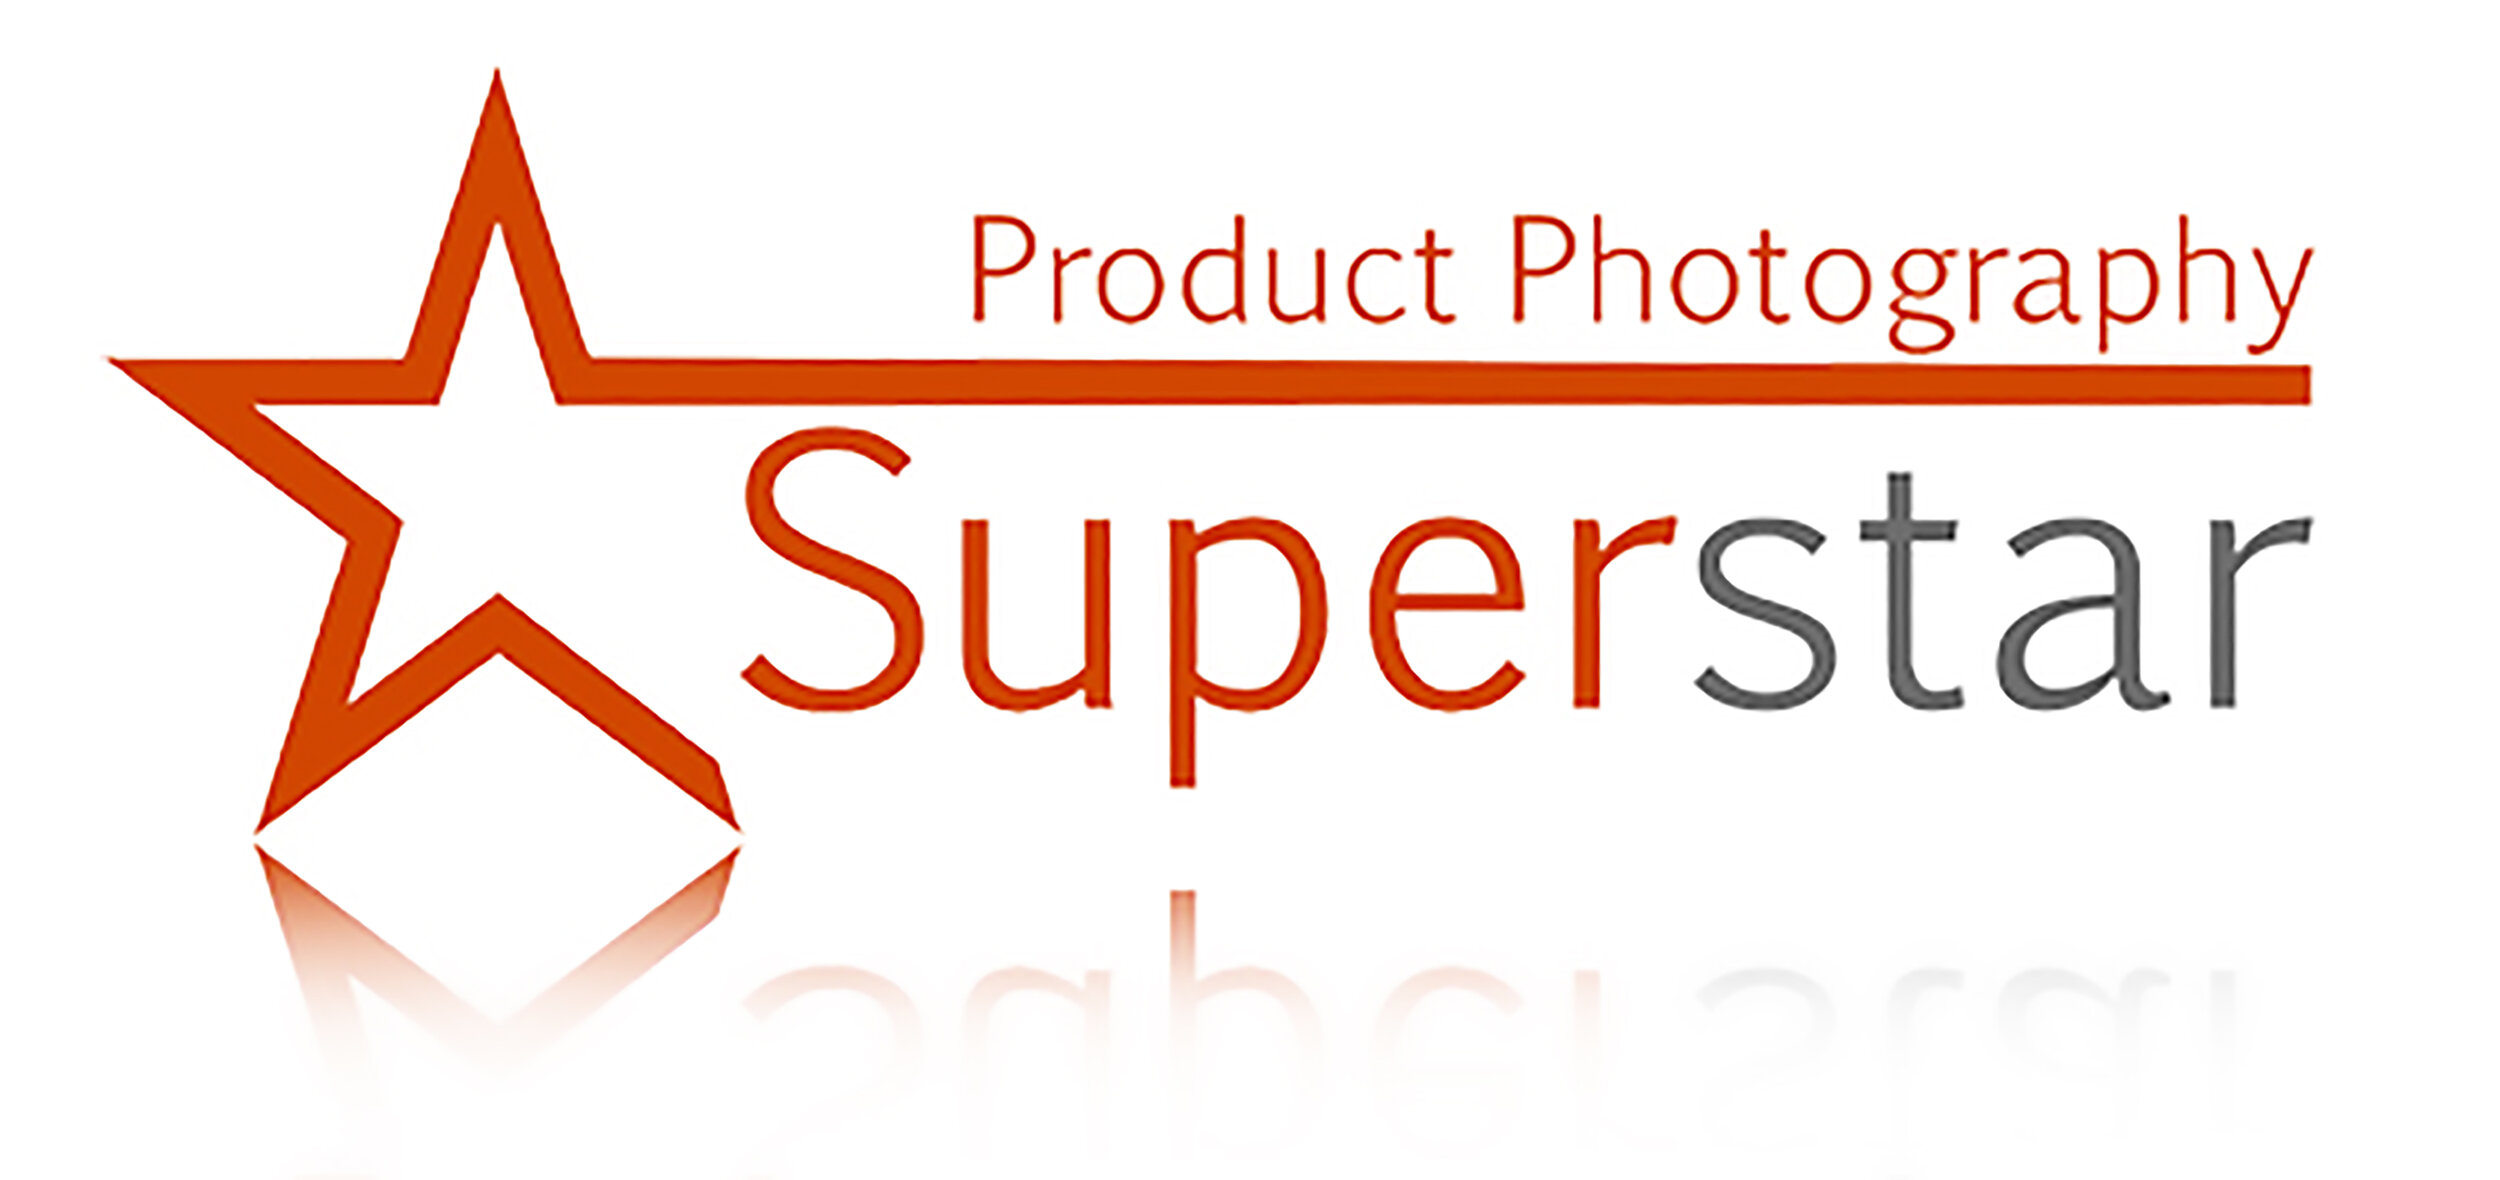 PRODUCT PHOTOGRAPHY SUPERSTAR